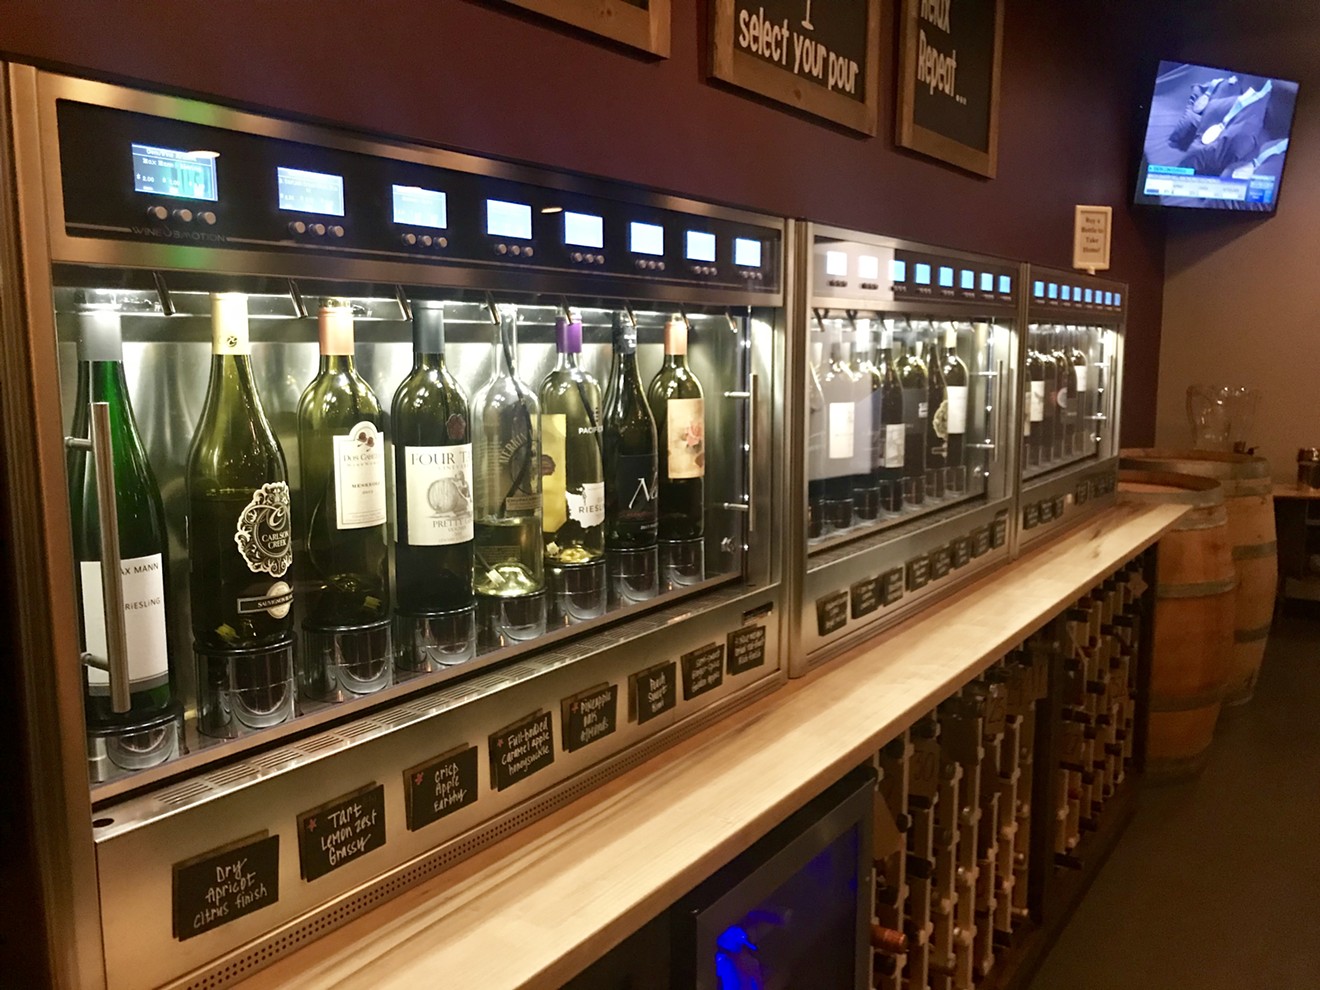 Self-serve wine by the bottle at GenuWine, with lots of local wineries represented.